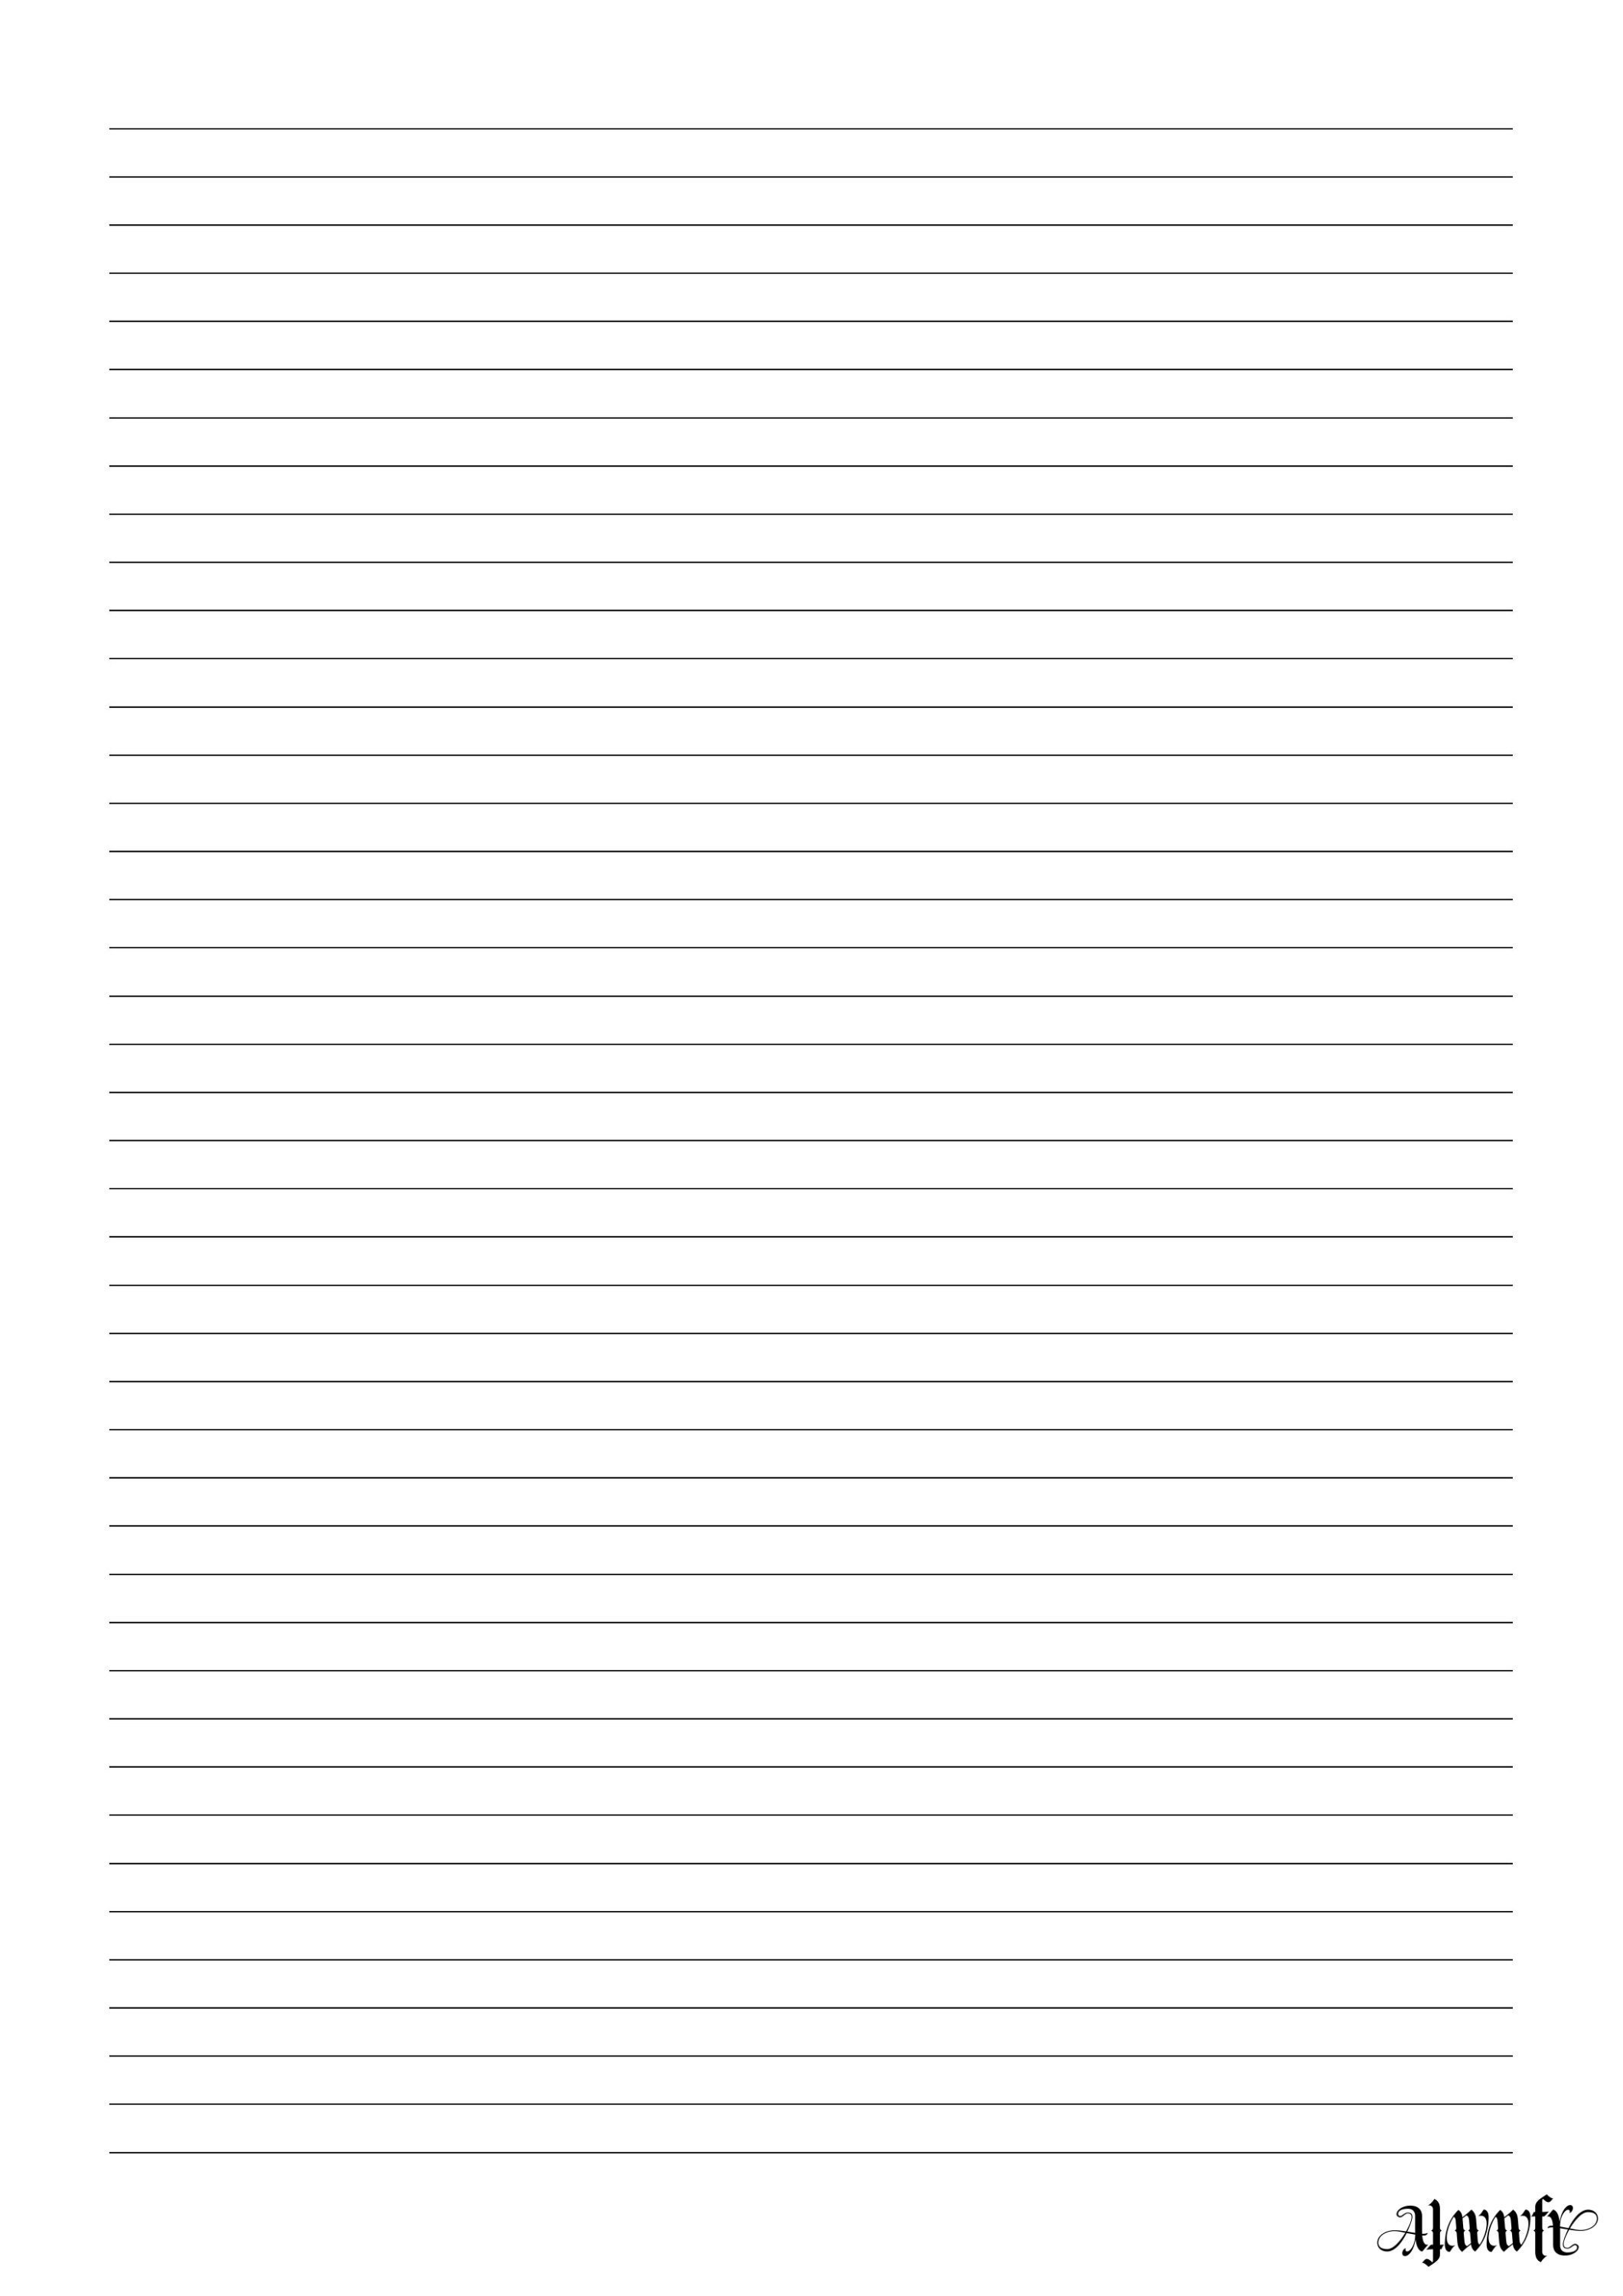 Free 19 Sample Lined Paper Templates In Pdf Ms Word Raised Line